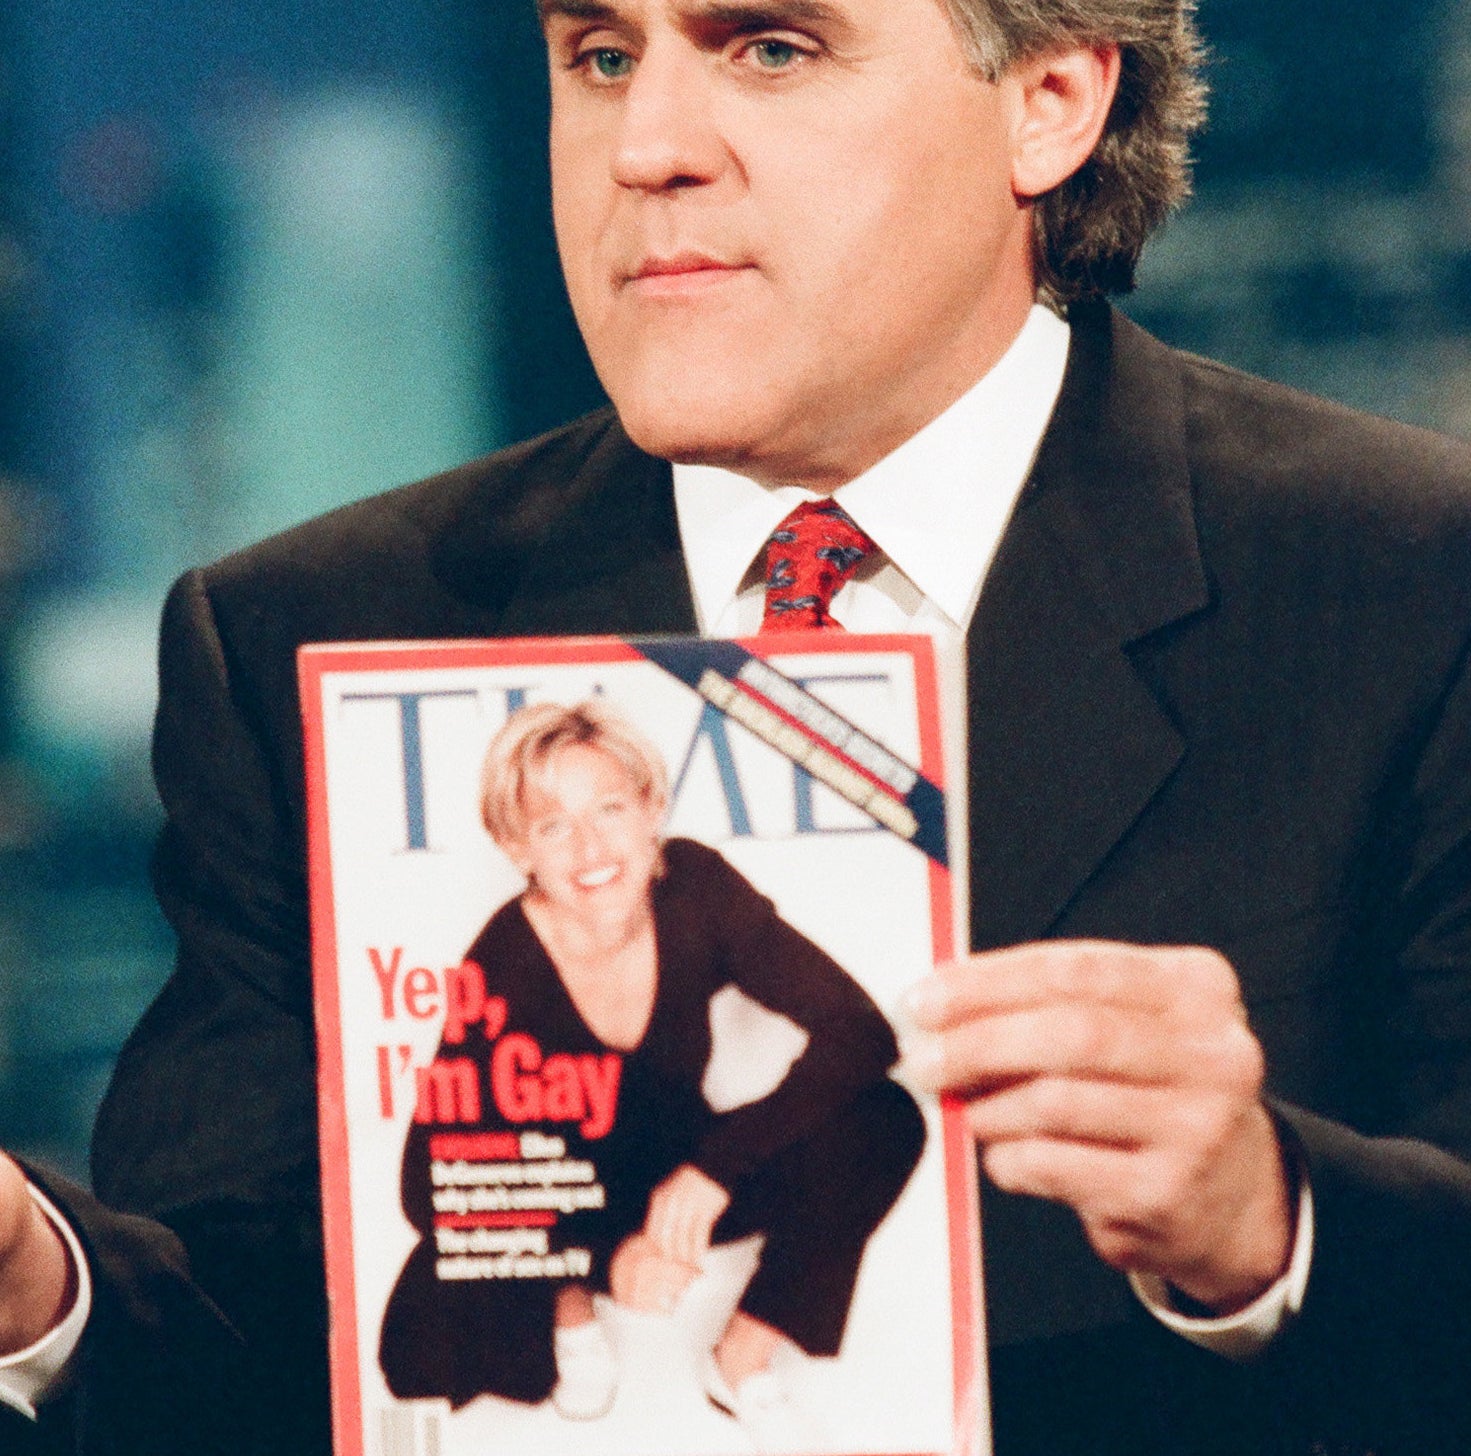 A man holds the cover of a Time magazine, which shows Ellen DeGeneres squatting and the text &quot;Yep, I&#x27;m Gay&quot;